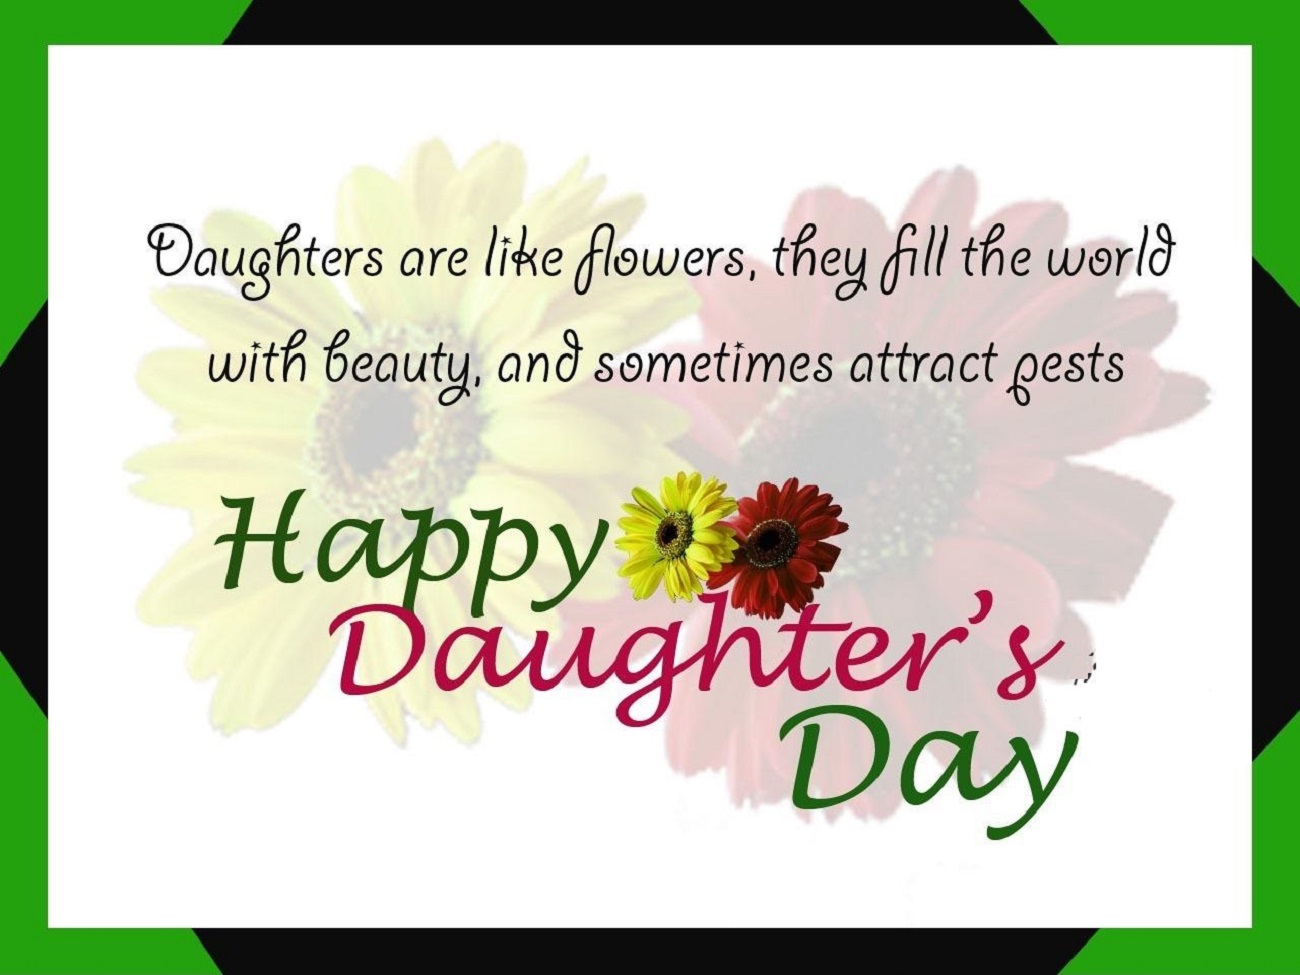 Happy Daughters Day Images, Pictures & Wallpapers